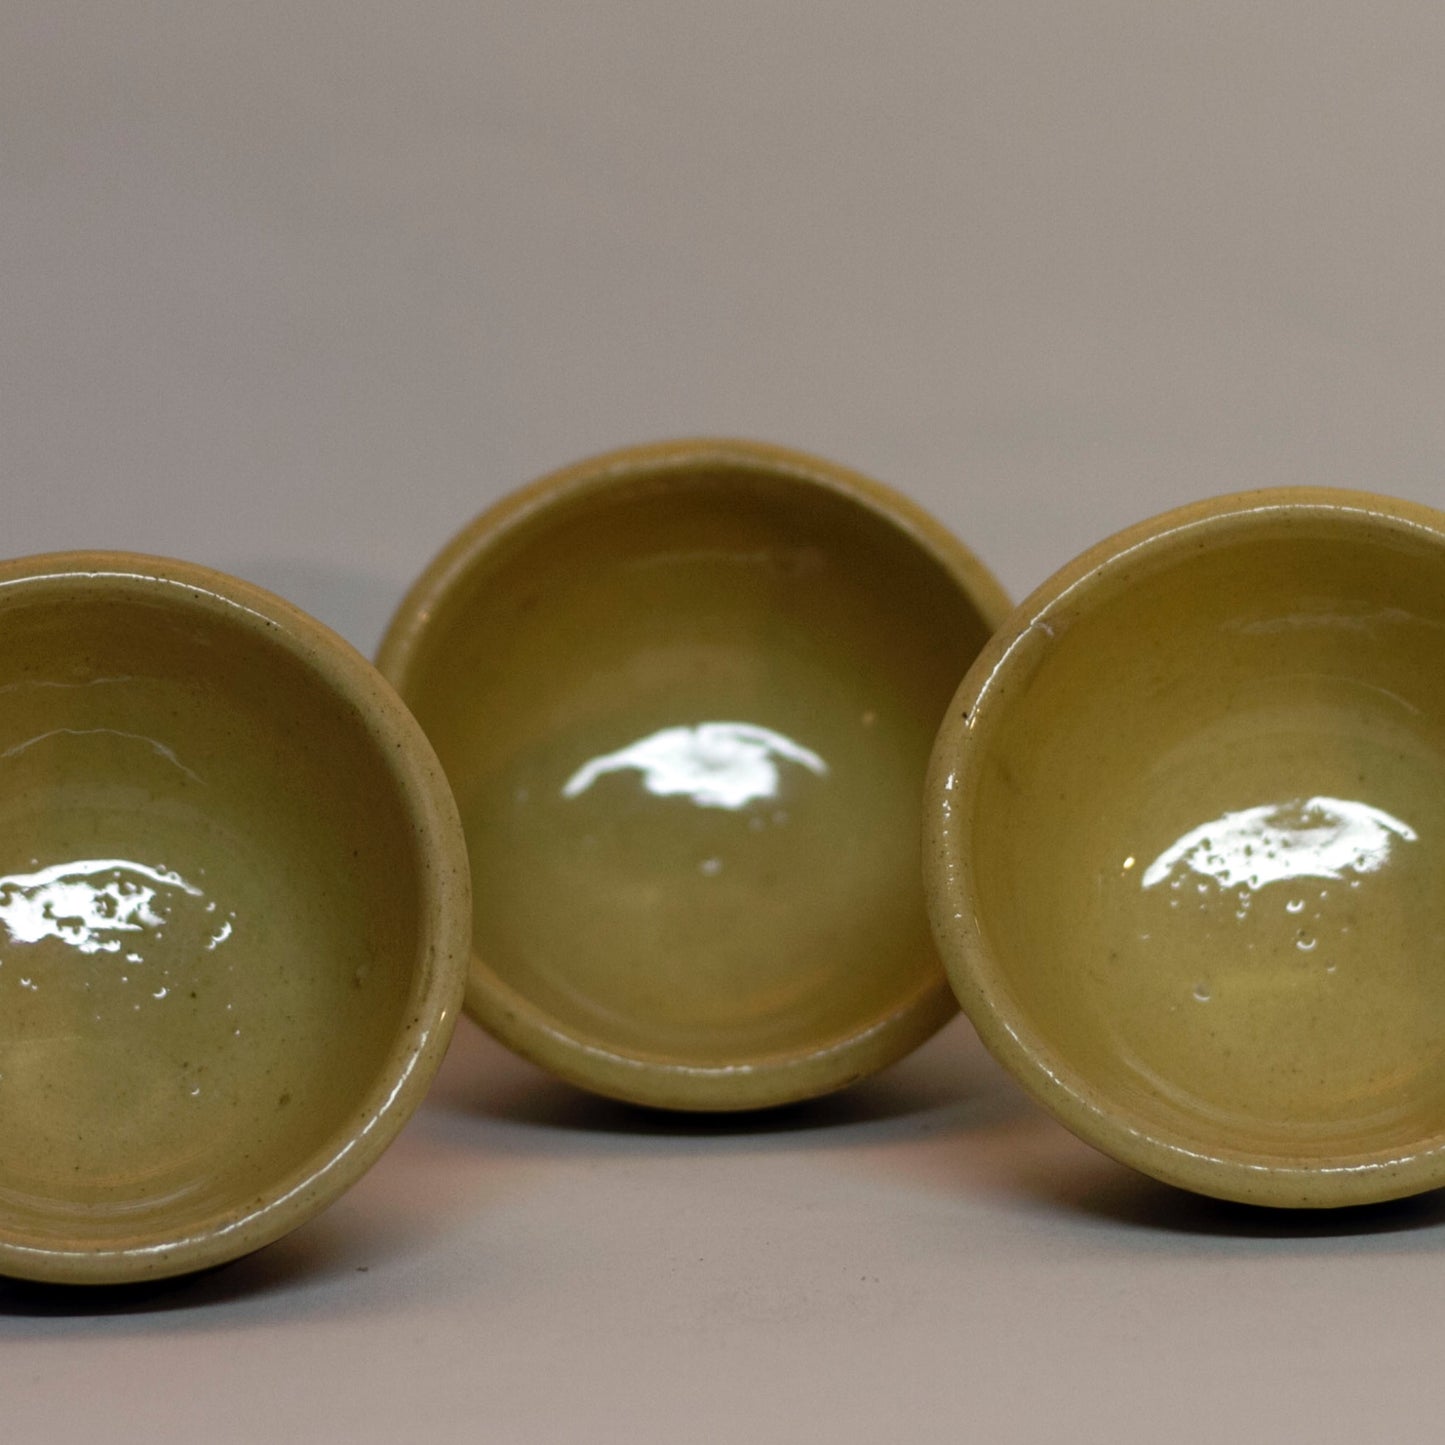 American YELLOWWARE SMALL BANDED BOWLS Set of Three (3) Circa Late 19th to Early 20th Century